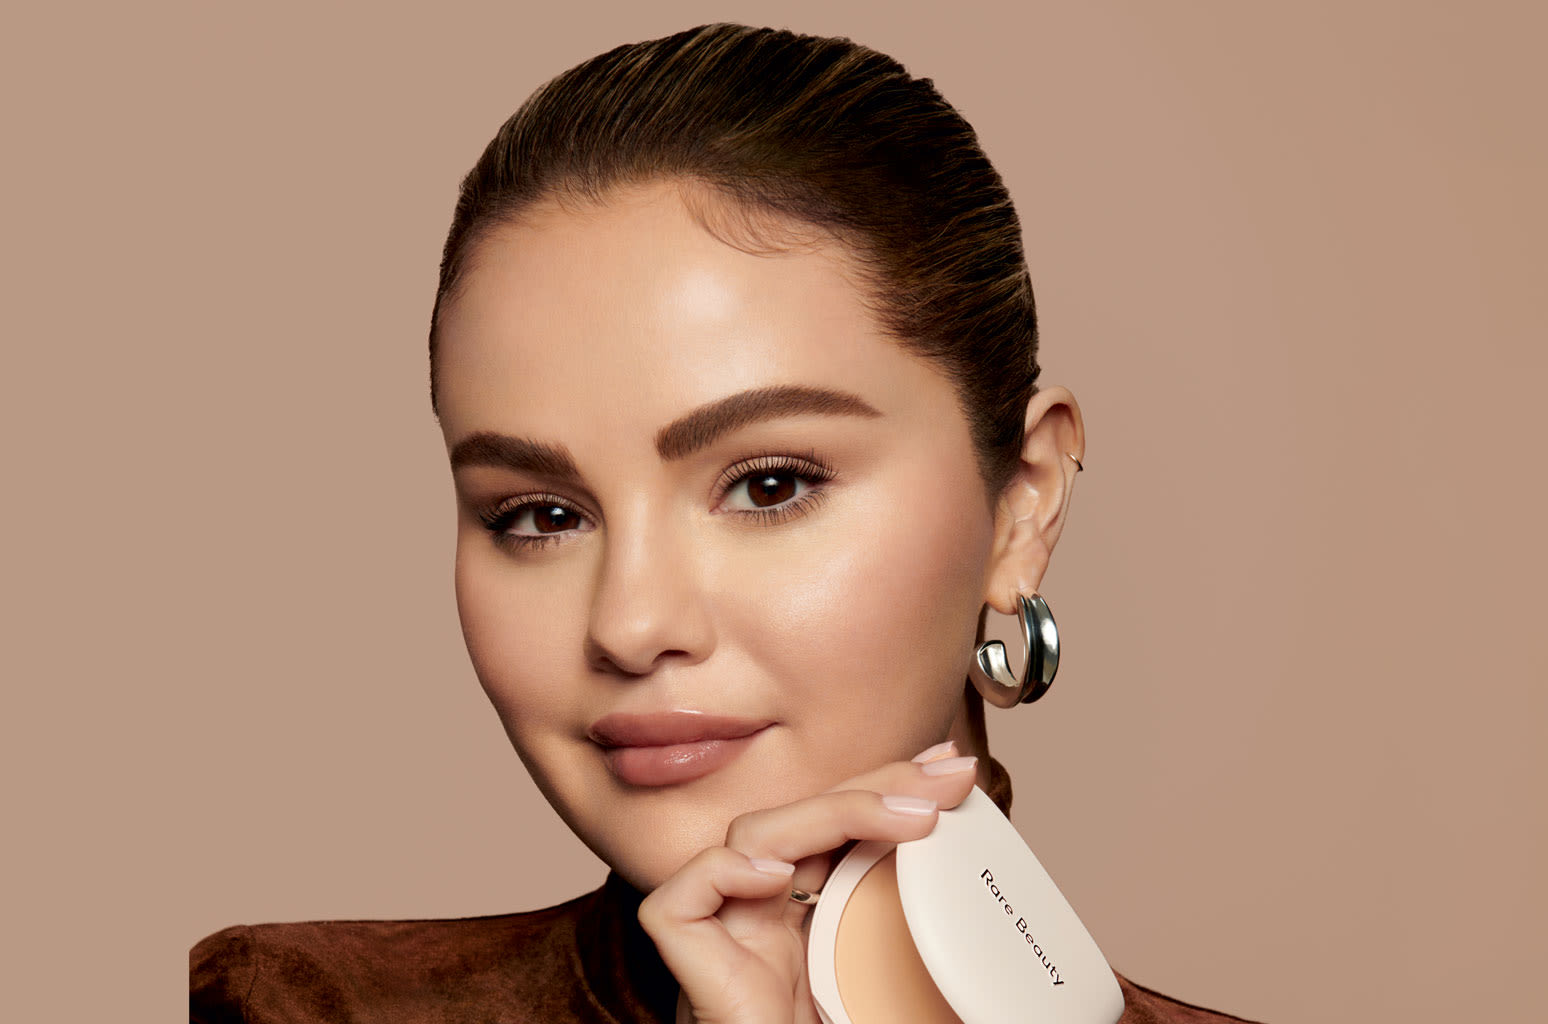 Selena Gomez Gushes Over Rare Beauty’s New Finishing Powder: ‘It Brings Out the Best in My Skin’